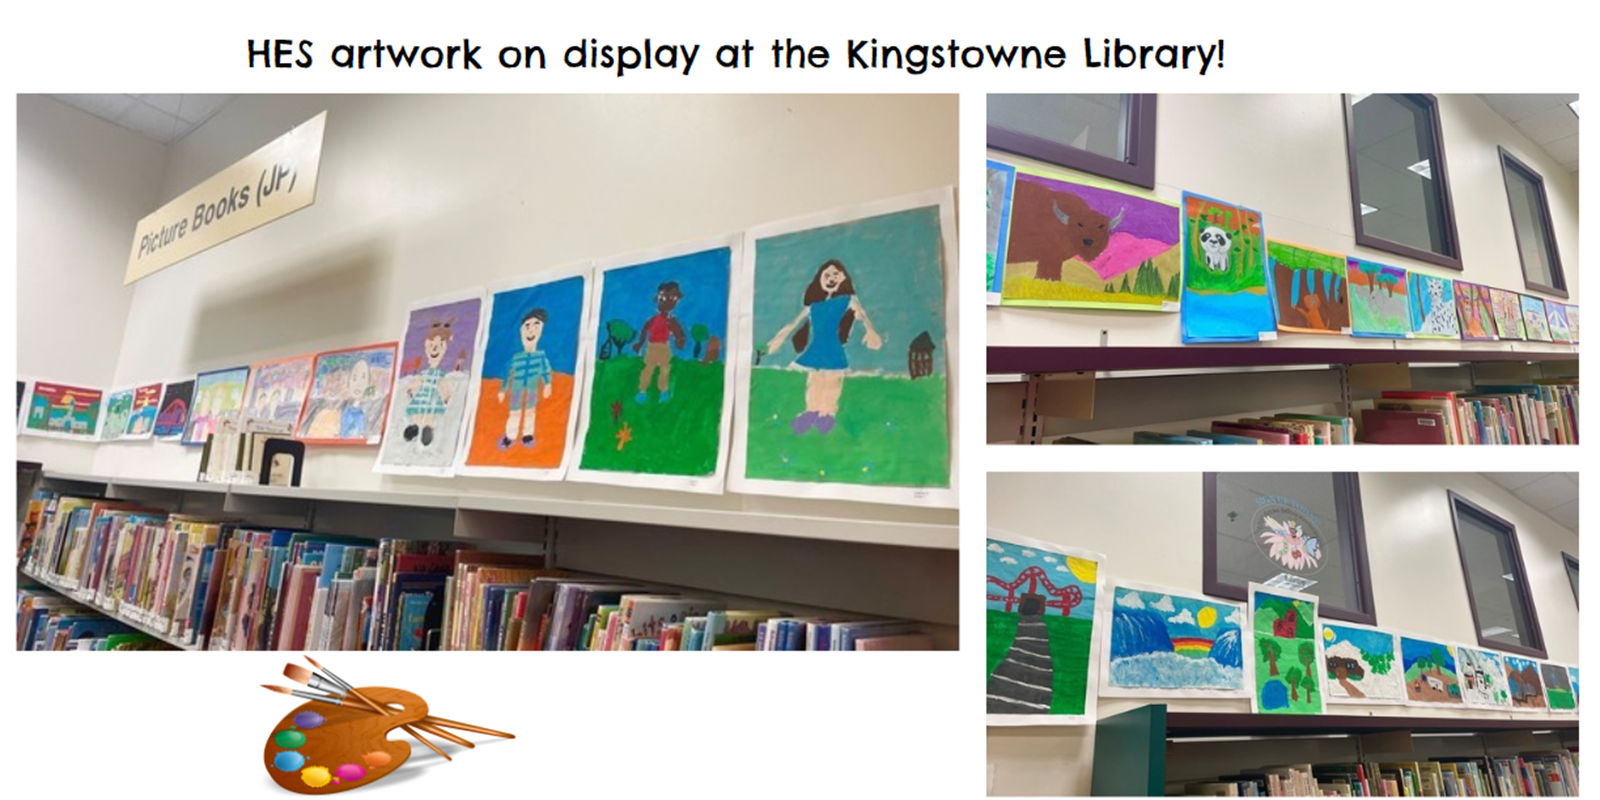 HES Student Artwork at Kingstowne Library